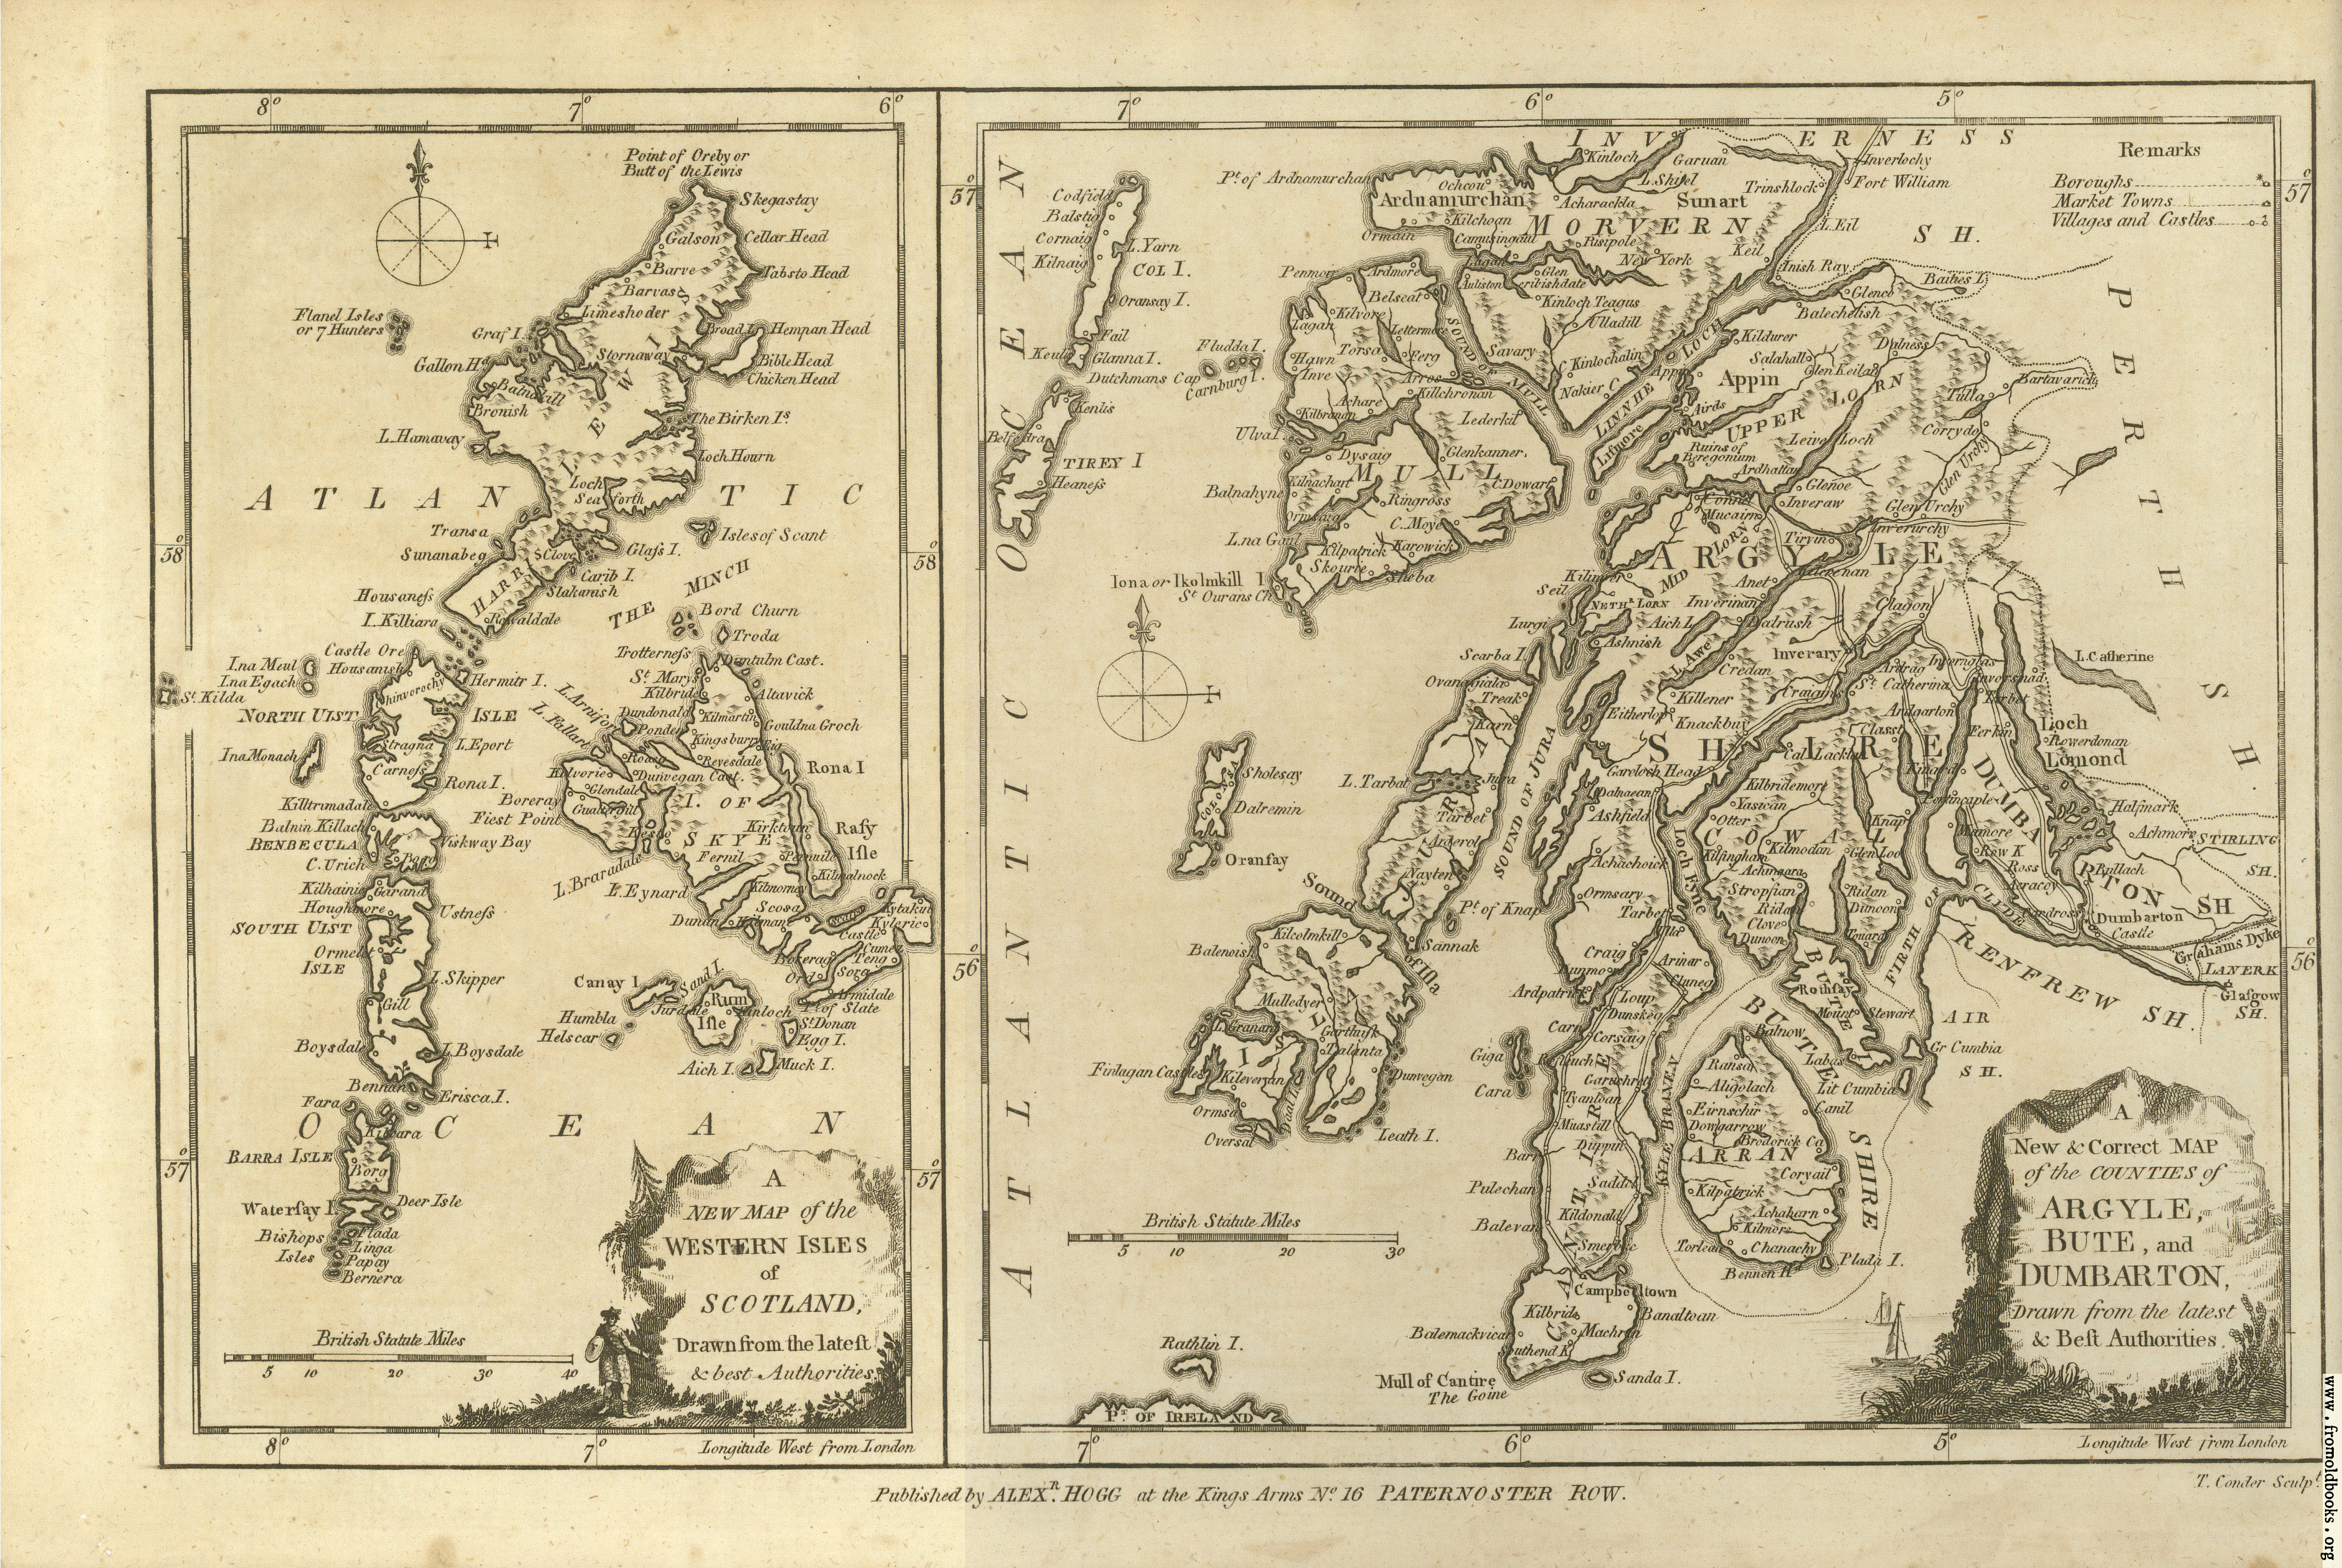 [Picture: Antique Map of Argyle, Bute and Dumbarton, in Scotland]